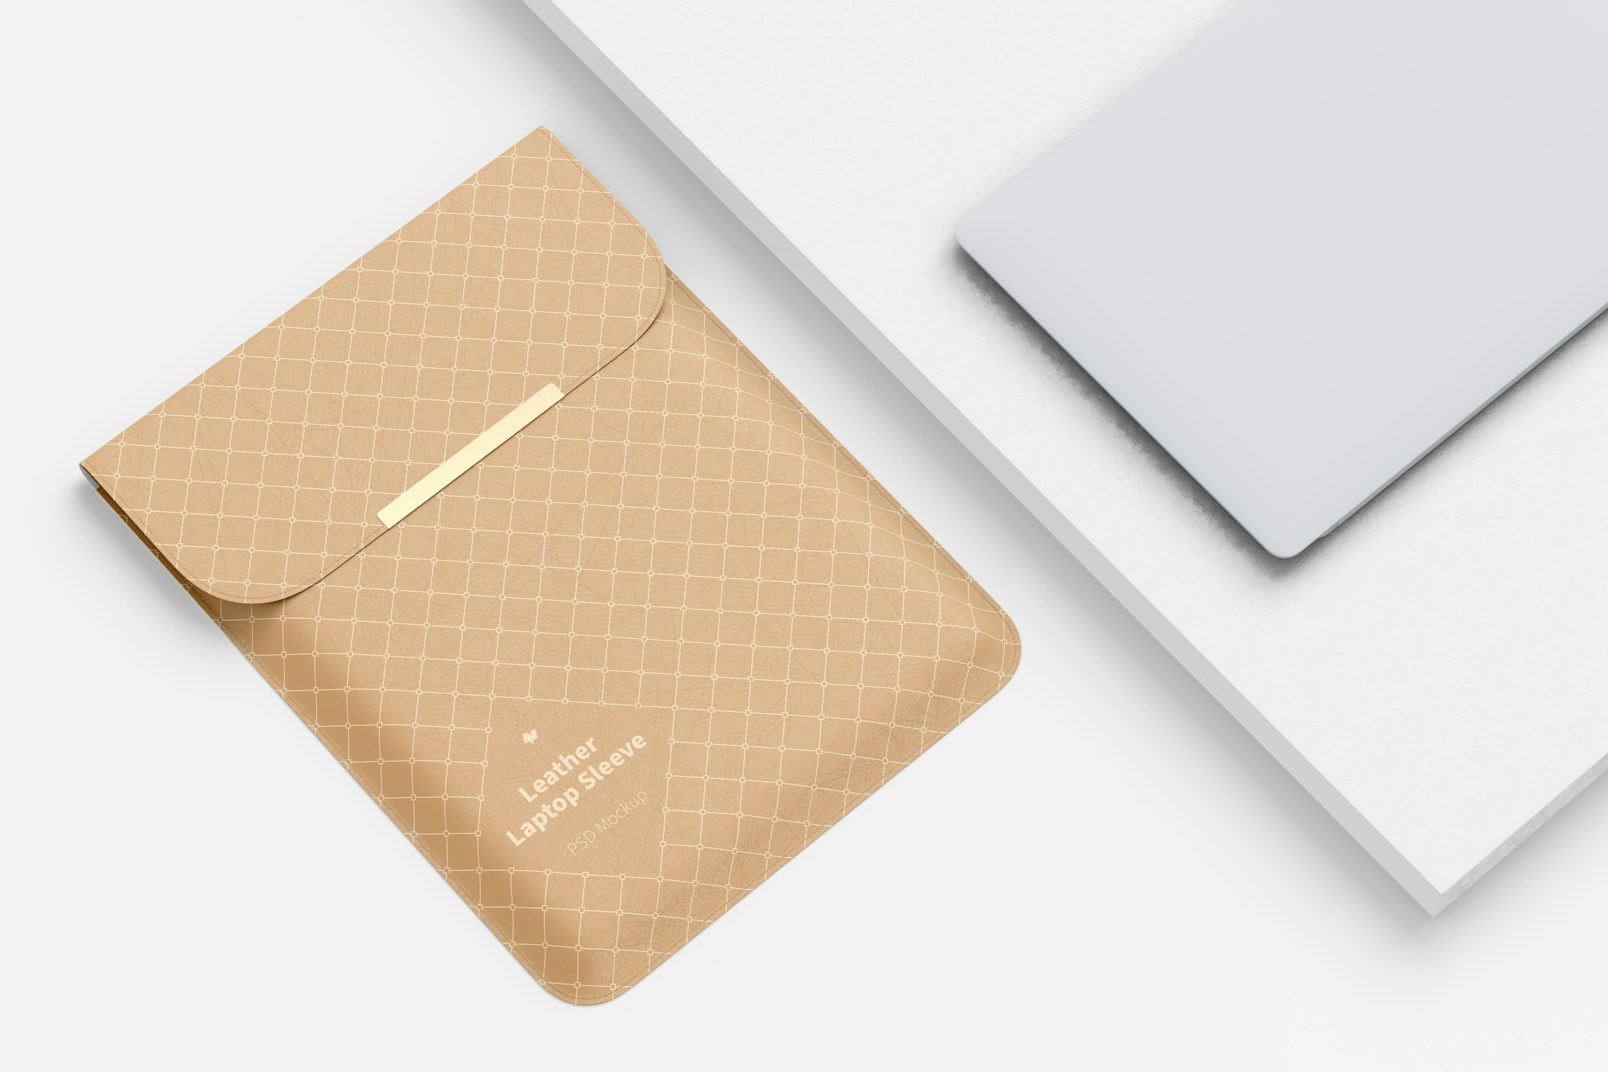 Leather Laptop Sleeve Mockup, Top View